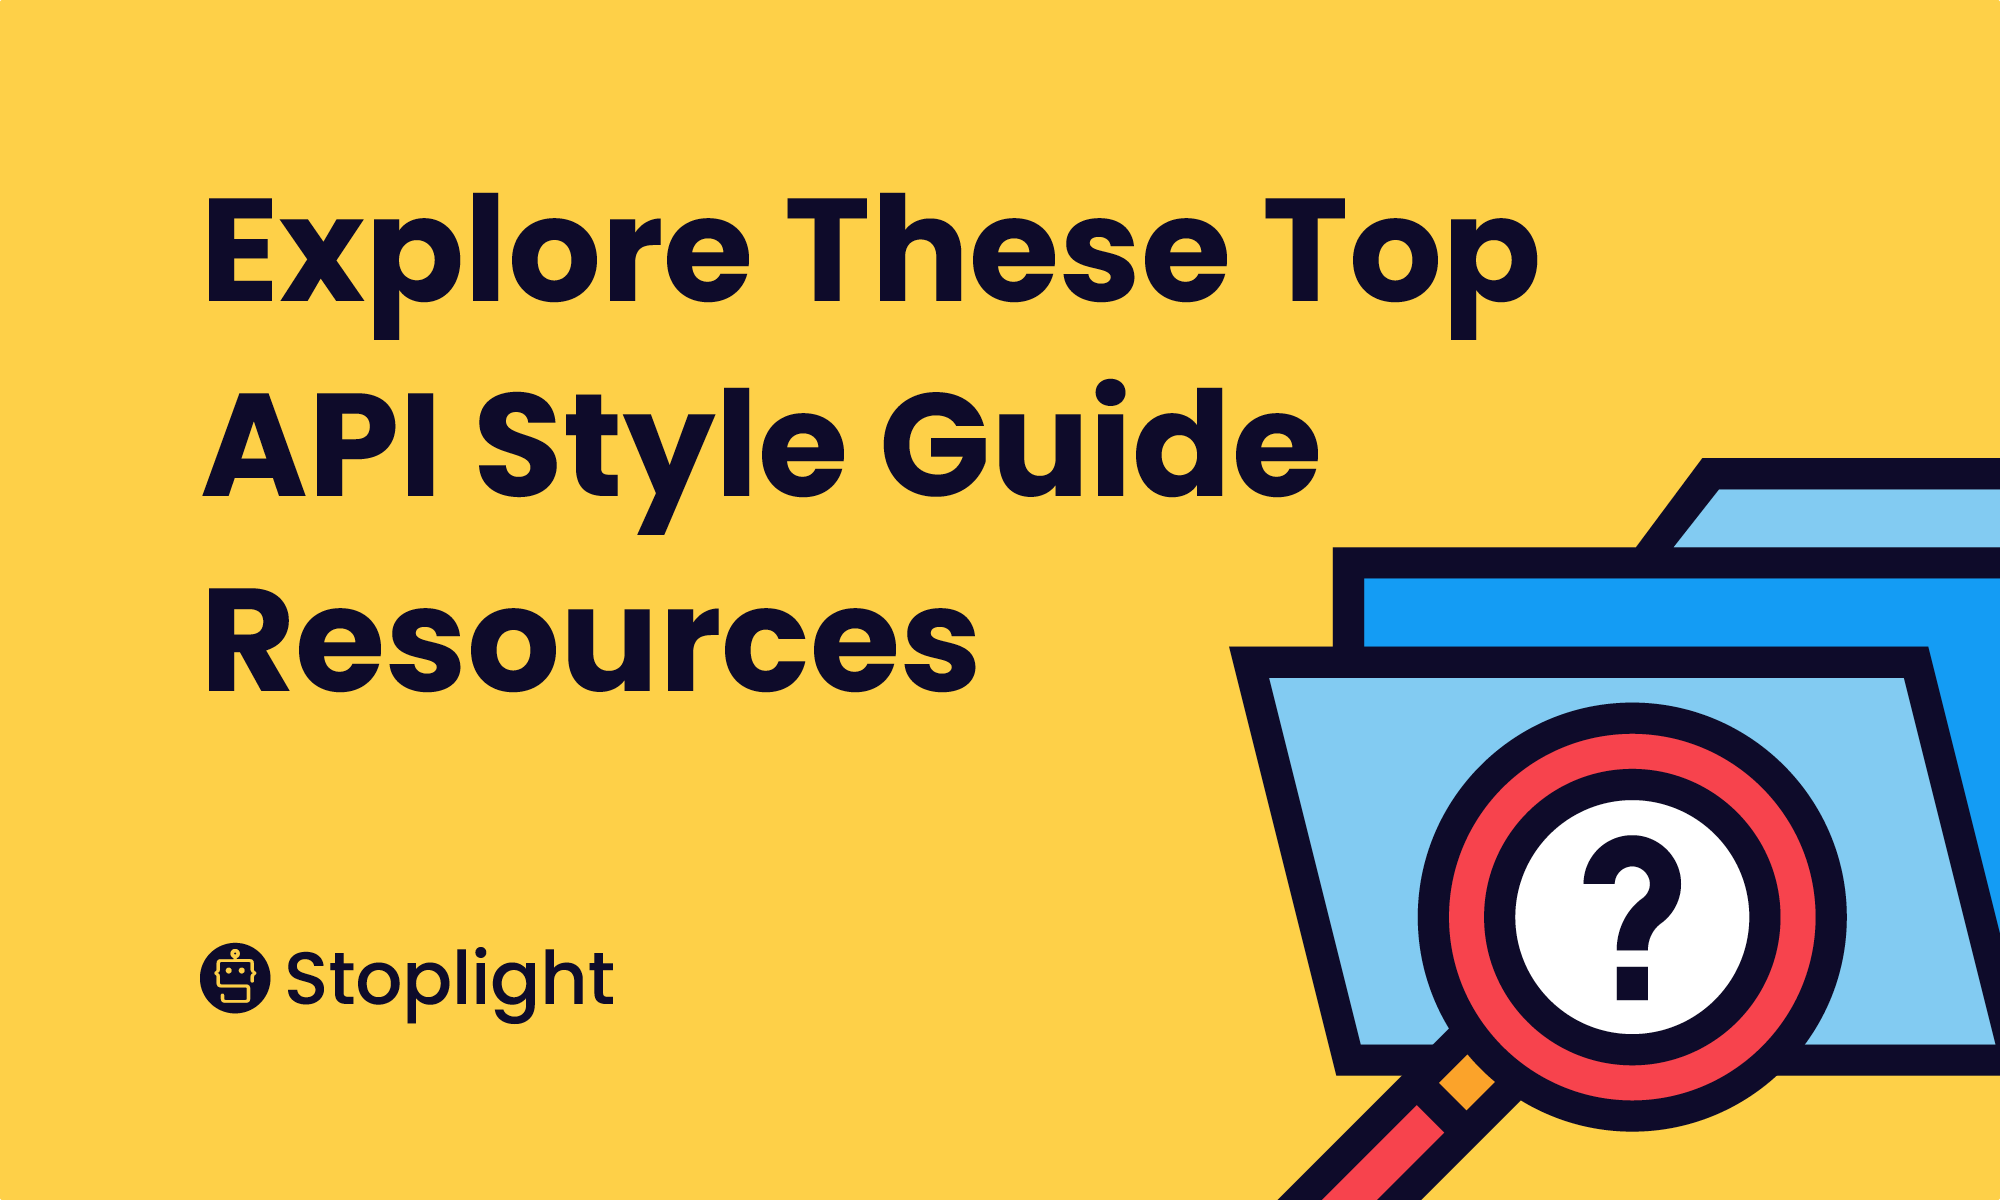 Explore These Top API Style Guide Resources